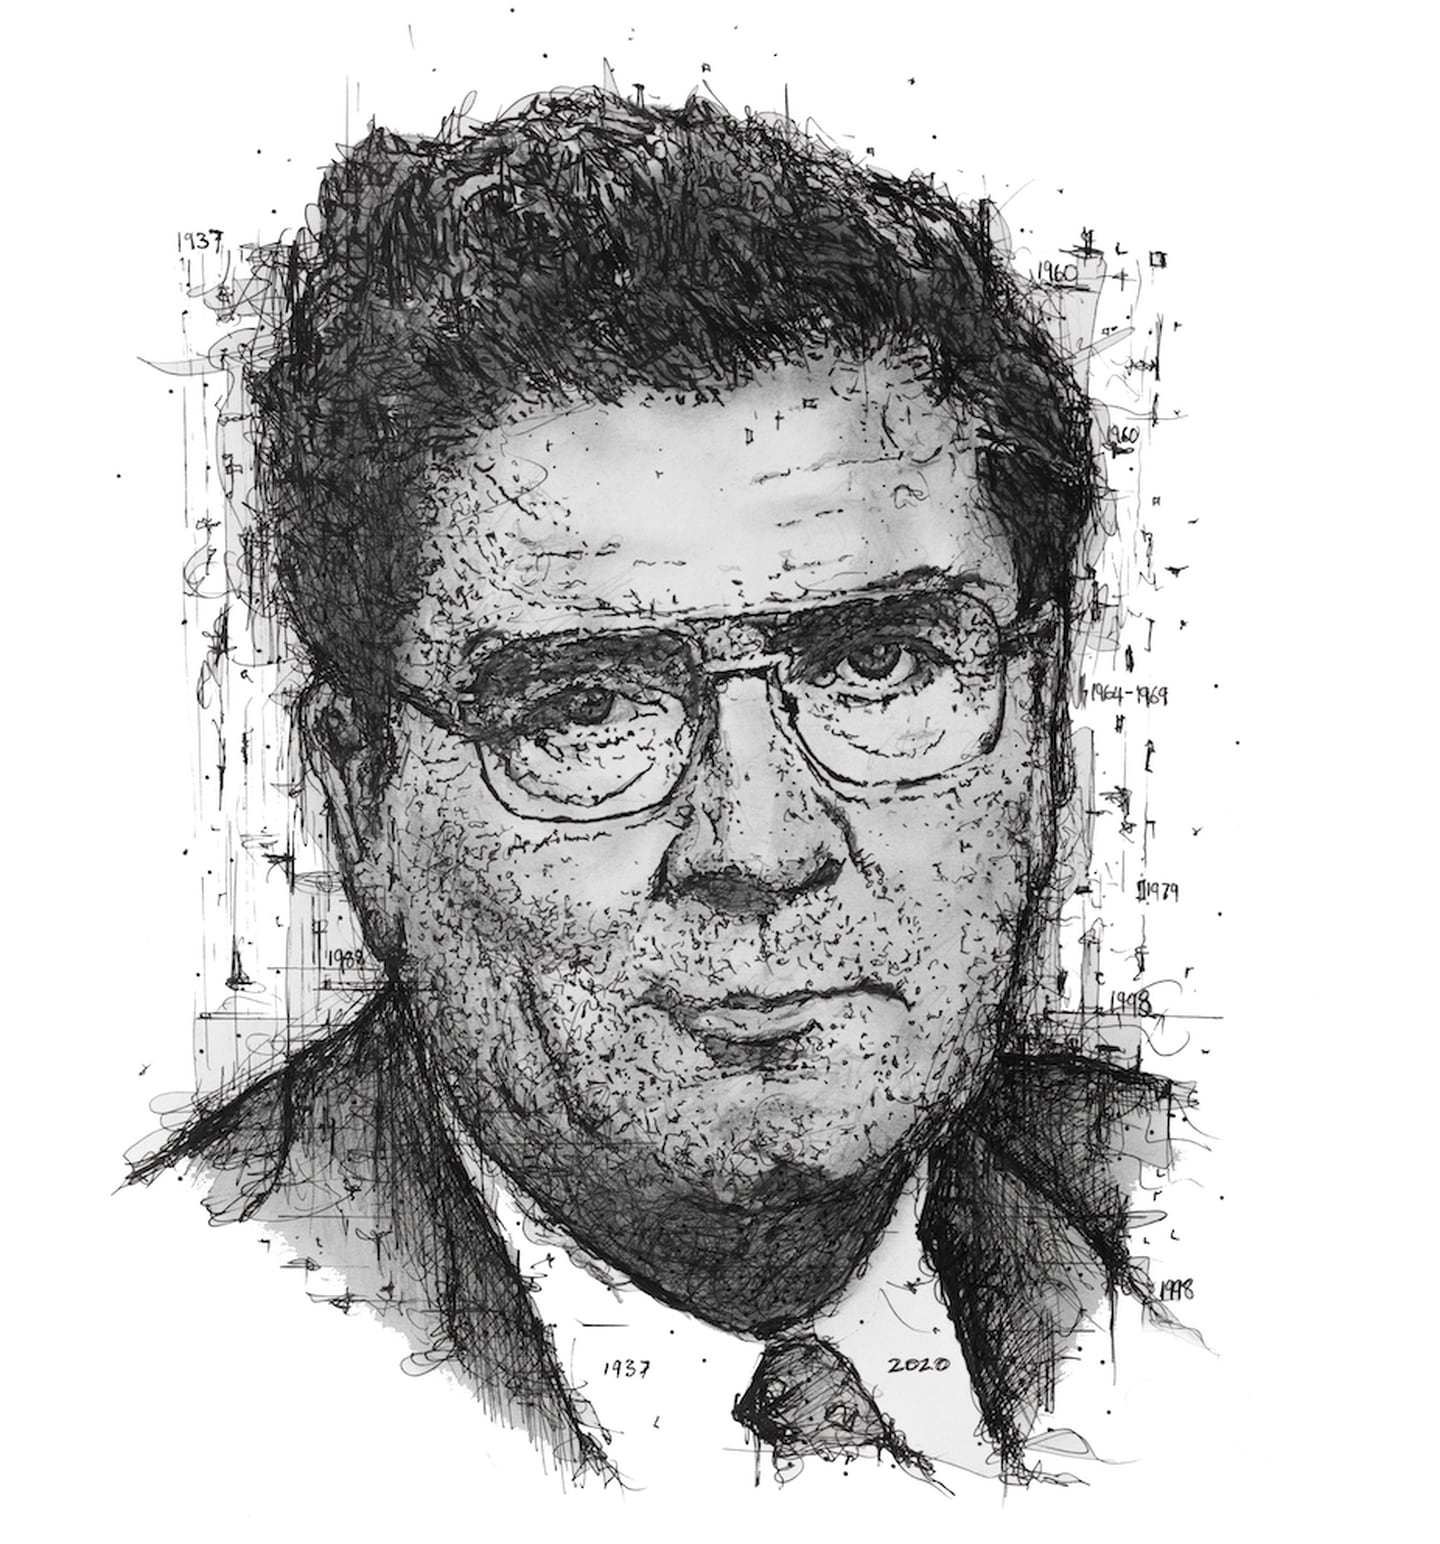 Portrait of the late SDLP leader John Hume by artist Shane Gillen, hand-drawn as part of his series commemorating the signatories of the Good Friday Agreement, 25 years on.